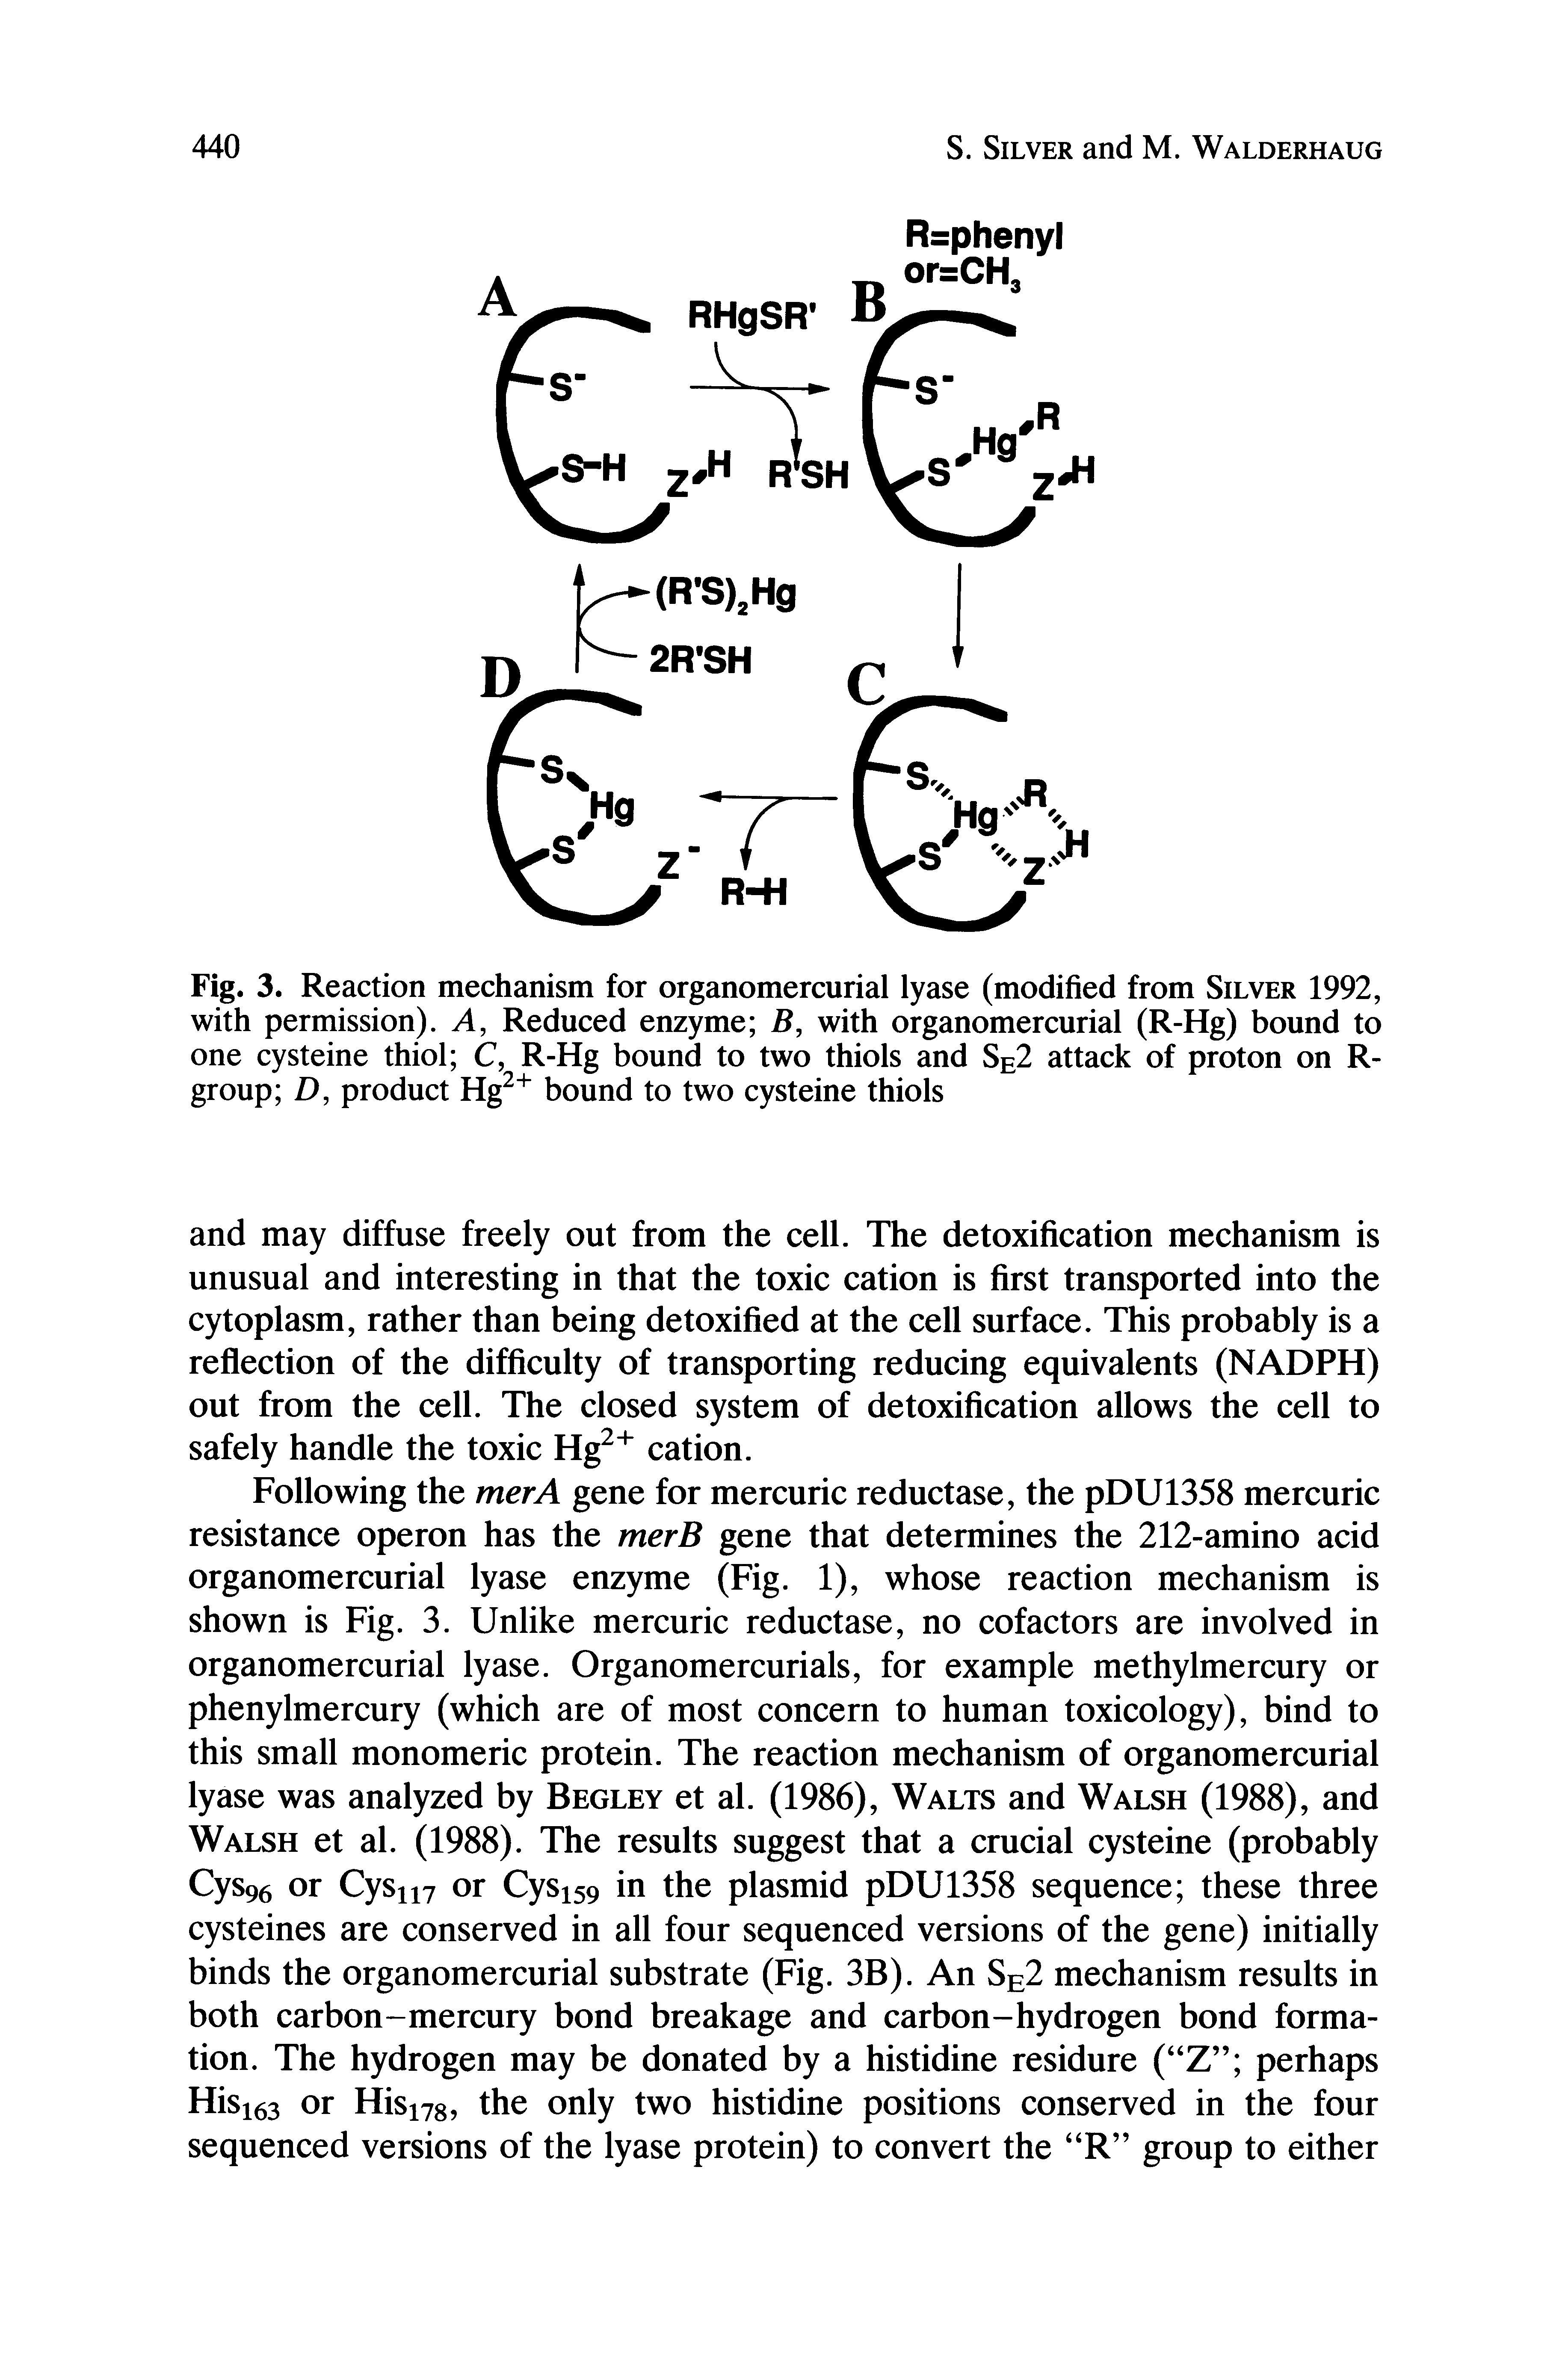 Fig. 3. Reaction mechanism for organomercurial lyase (modified from Silver 1992, with permission). A, Reduced enzyme B, with organomercurial (R-Hg) bound to one cysteine thiol C, R-Hg bound to two thiols and Se2 attack of proton on R-group D, product Hg " bound to two cysteine thiols...